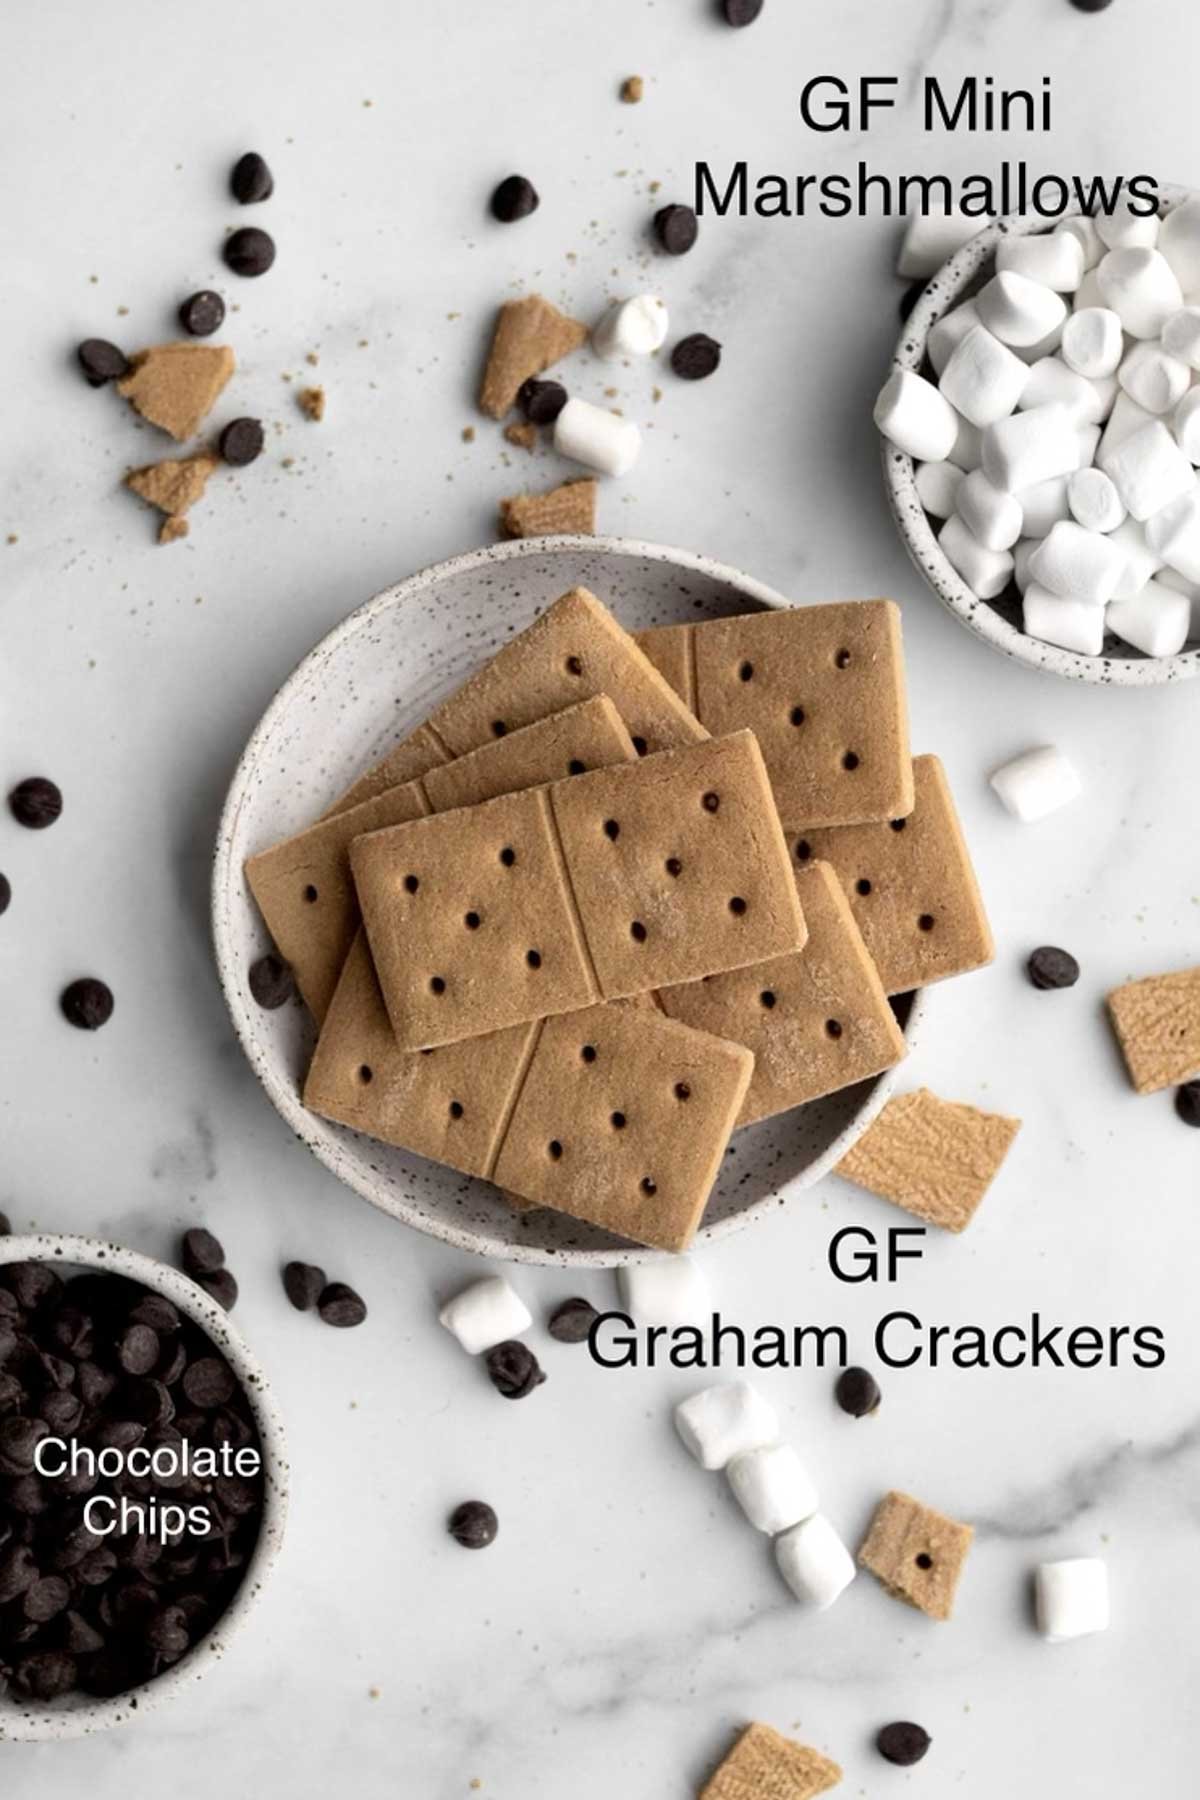 Chocolate chips, gluten free graham crackers, gluten free mini marshmallows in separate containers.